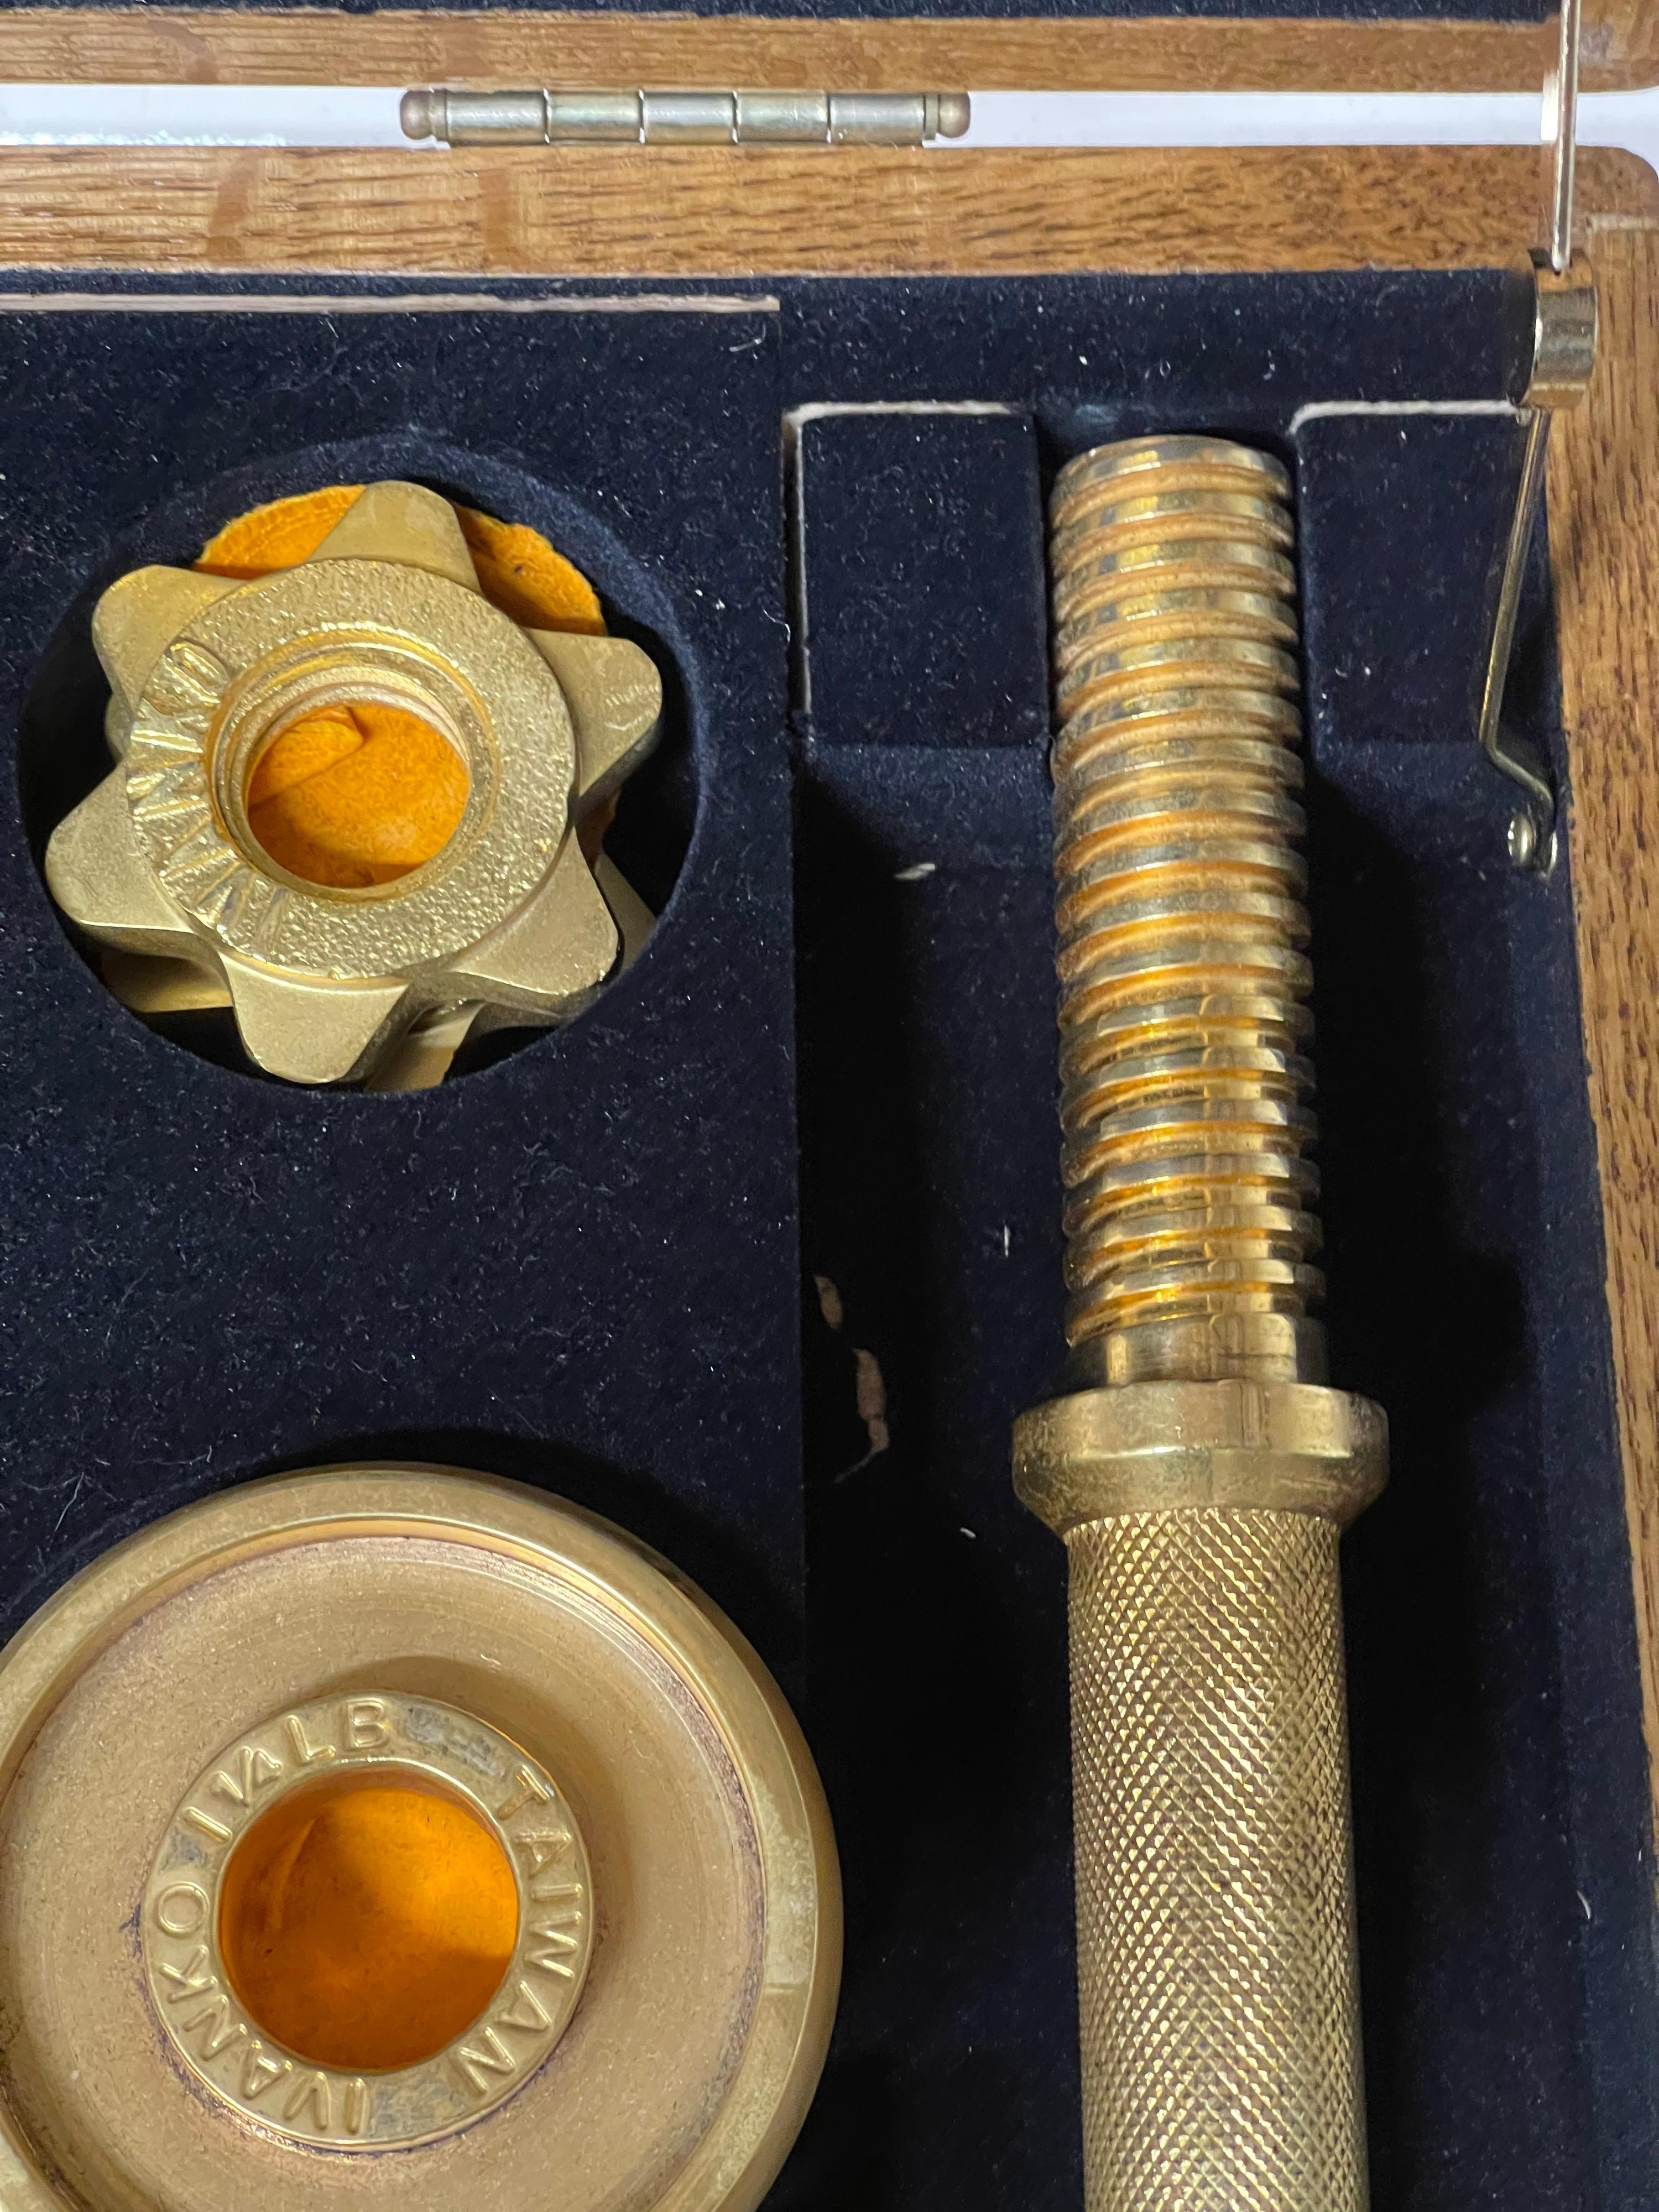 American 1980’s Ivanko 22 Karat Gold Plated Weight Set For Sale